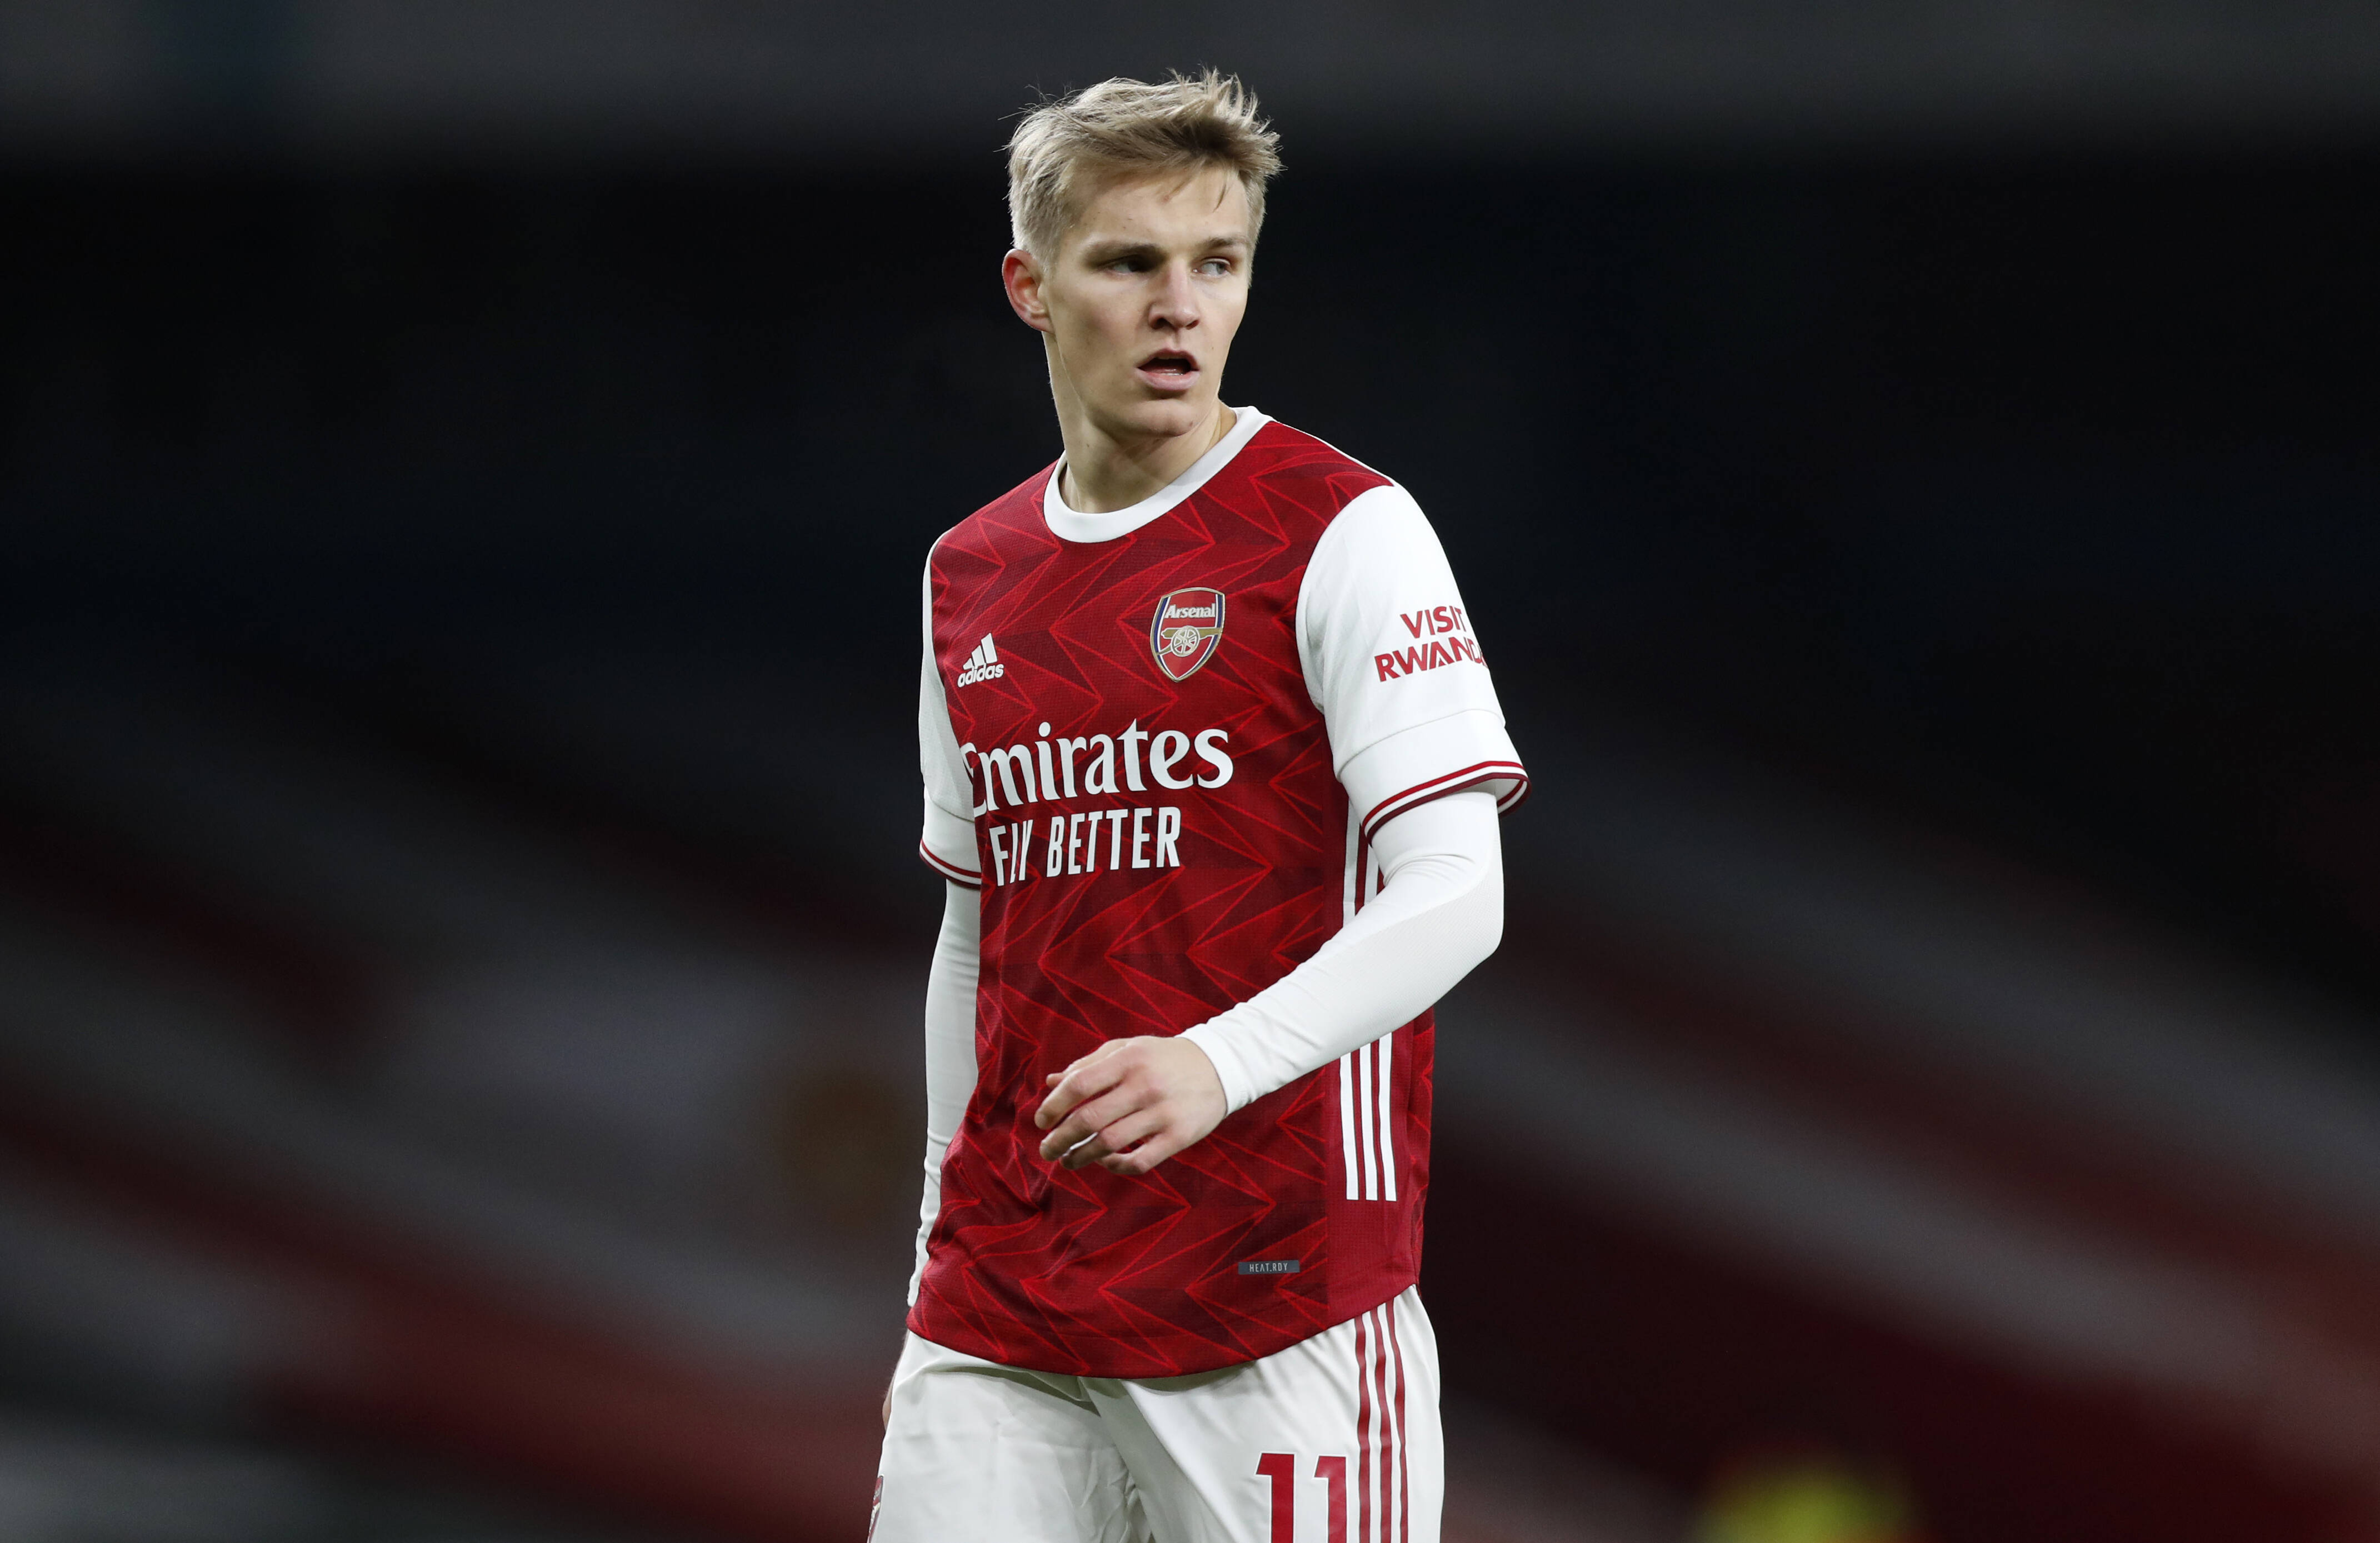 Psg Mercato Arsenal Fears The Potential Interest From Paris Sg For Martin Odegaard Psg Talk [ 2778 x 4284 Pixel ]